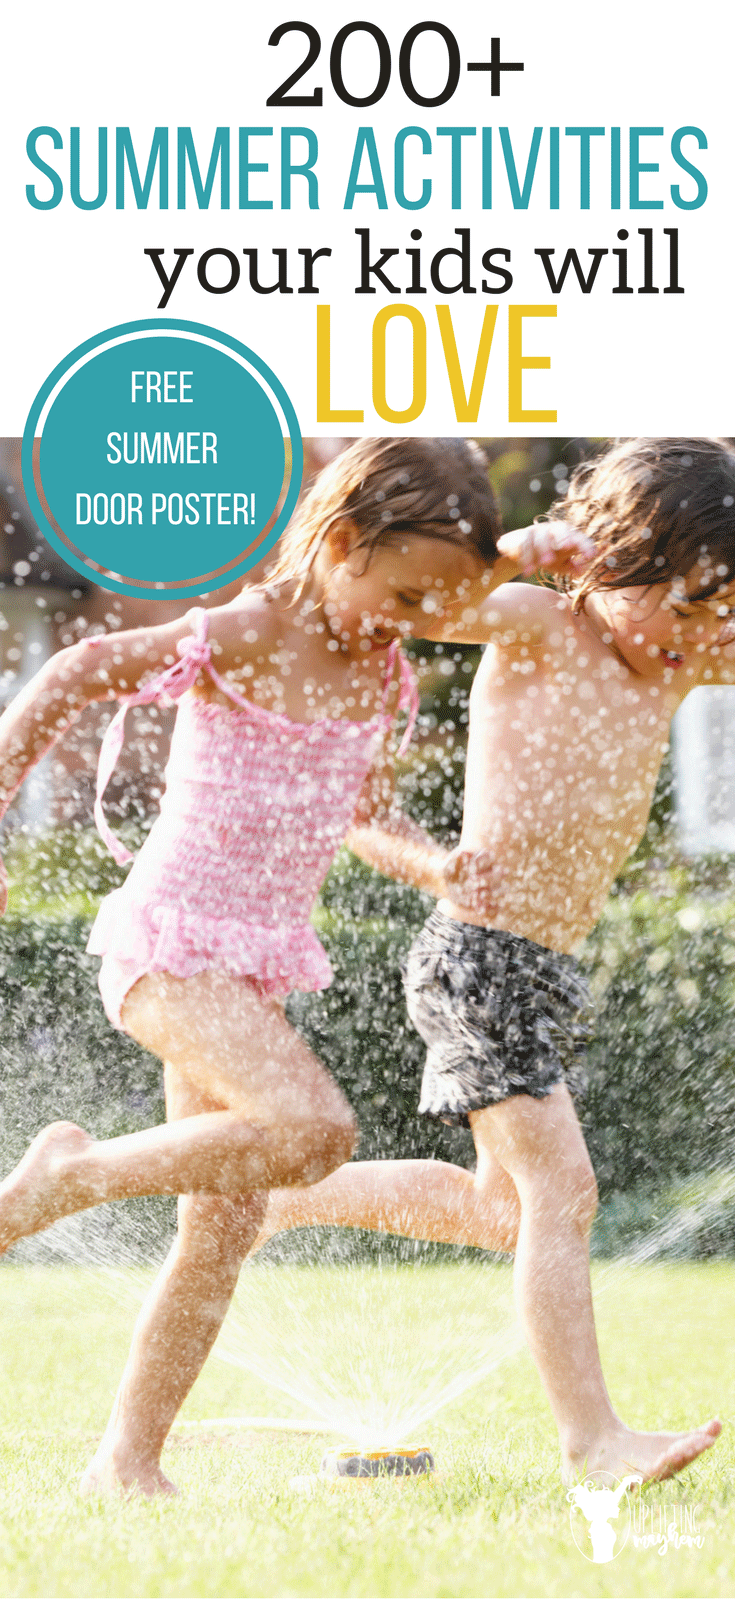 Summer Activities your kids will love! Help break the boredom cycle. When your kids say they are bored, send them to this list of 200+ summer activities